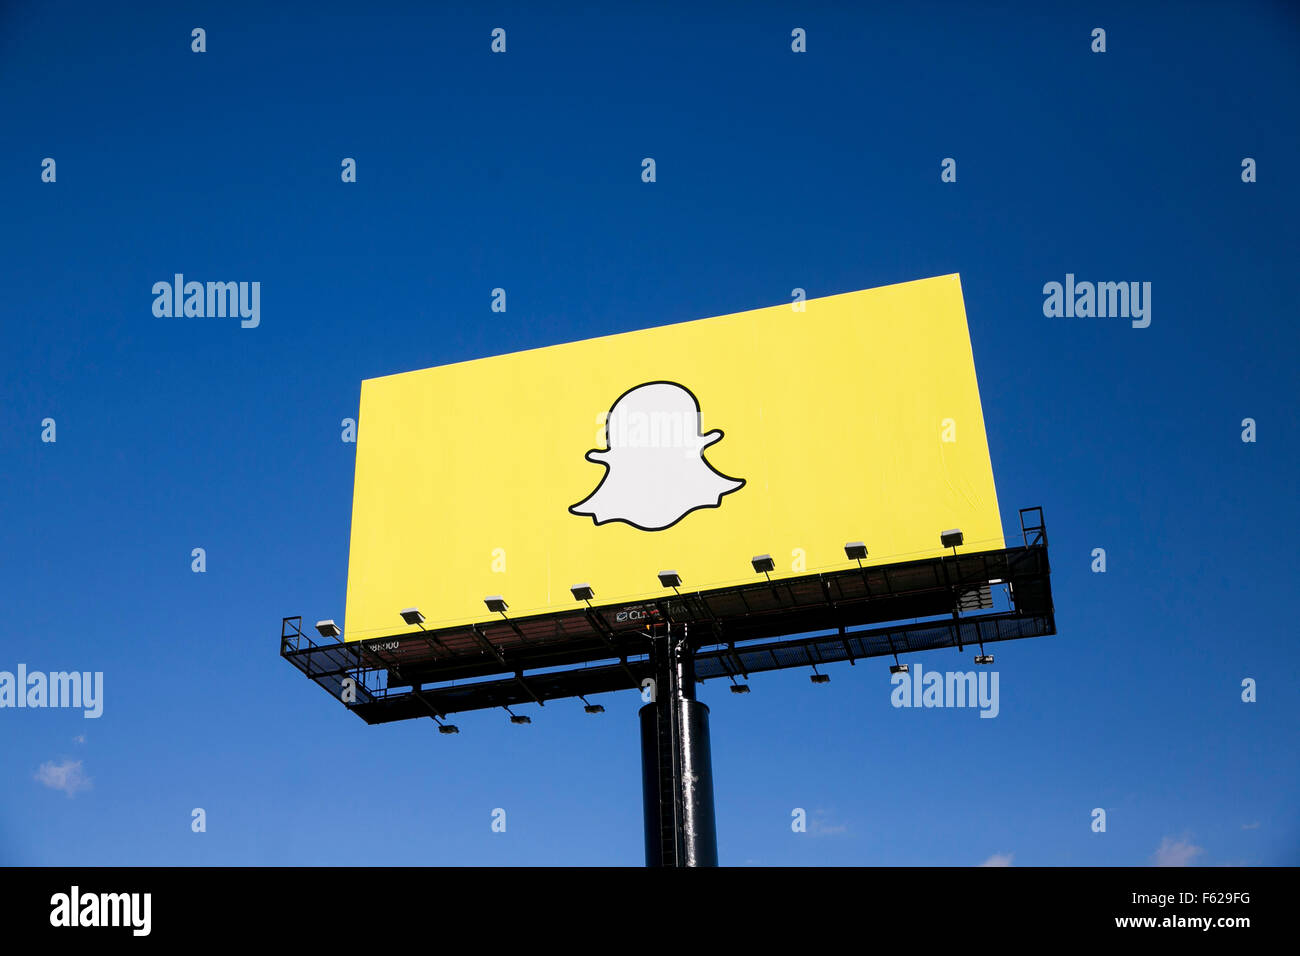 An advertising billboard featuring the Snapchat logo in Richfield, Minnesota on October 24, 2015. Stock Photo